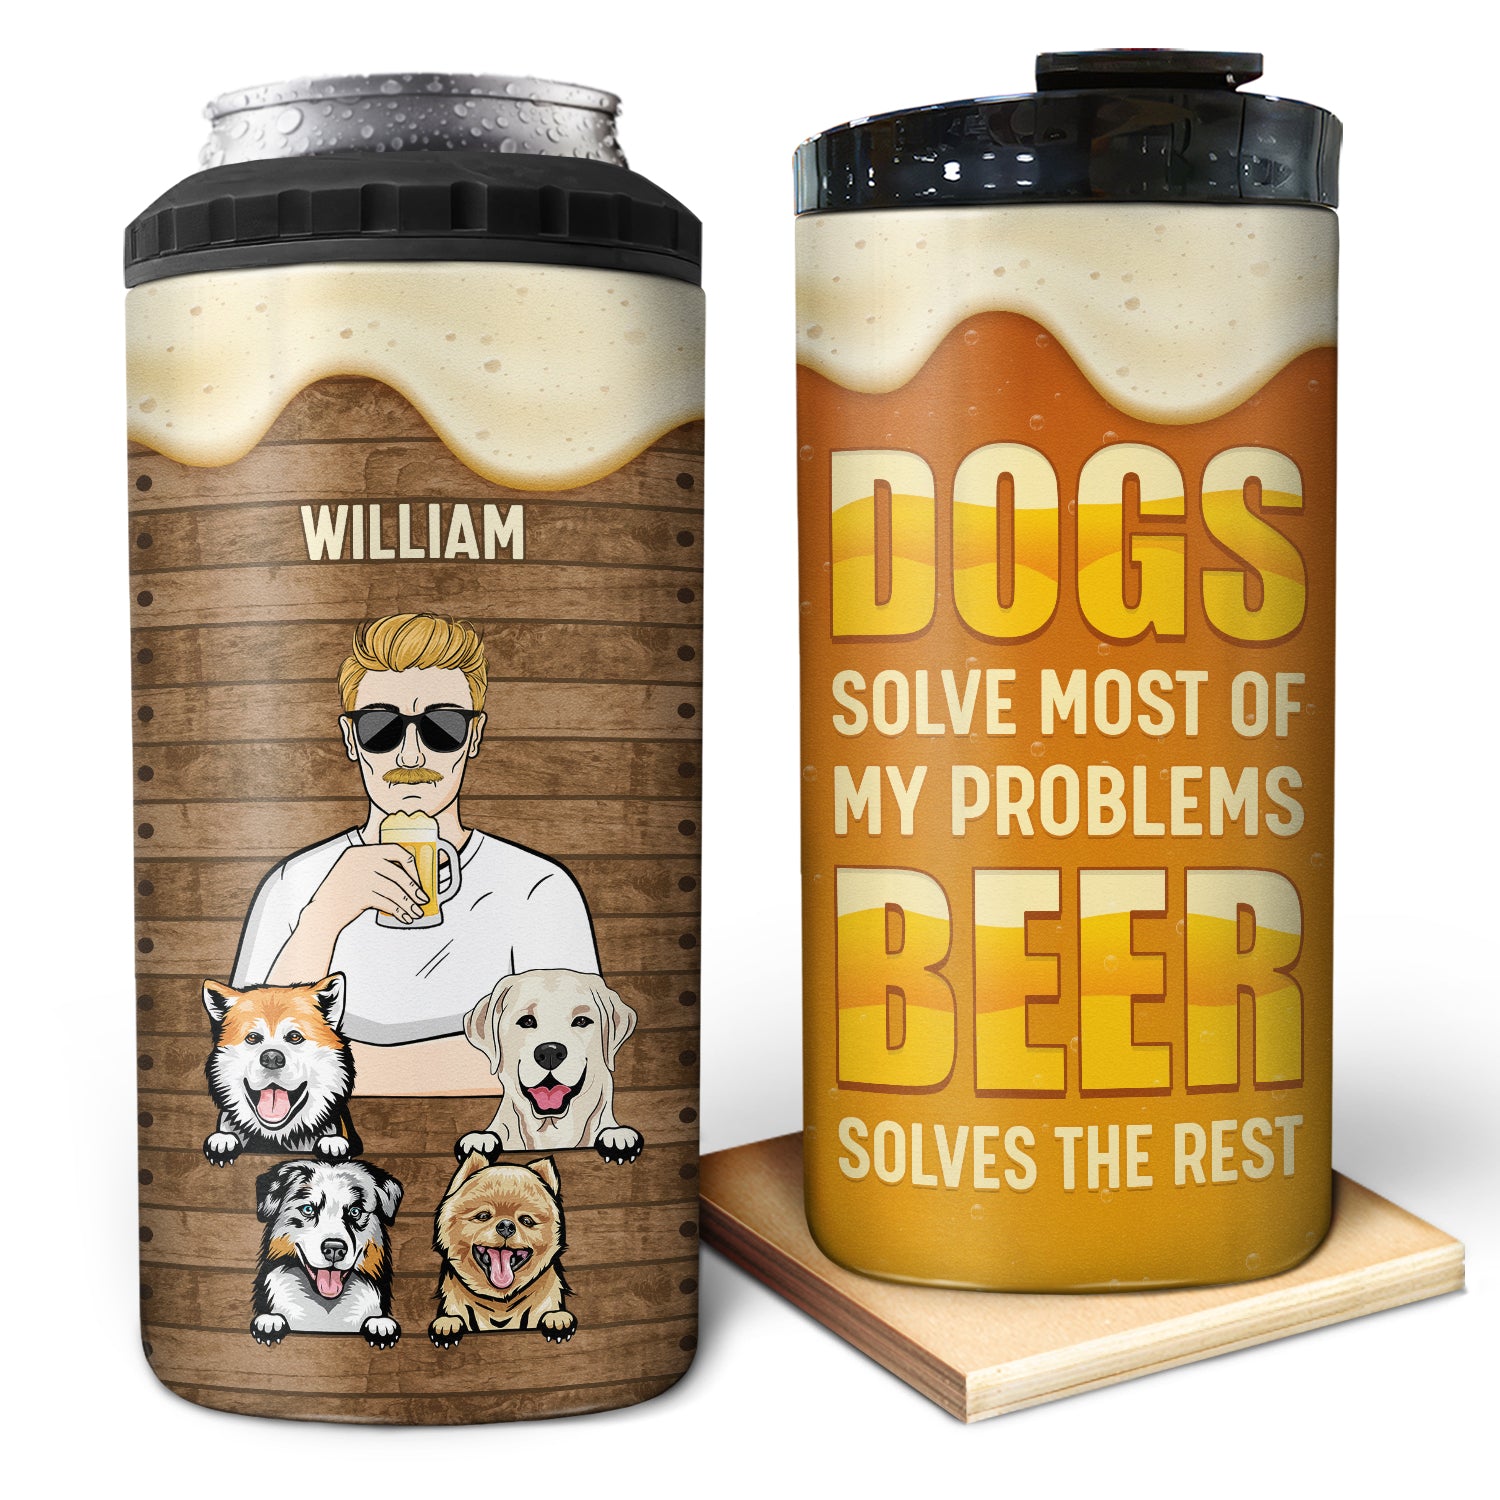 Dogs Solve Most Of My Problems Beer Solves The Rest - Gift For Father - Personalized Custom 4 In 1 Can Cooler Tumbler